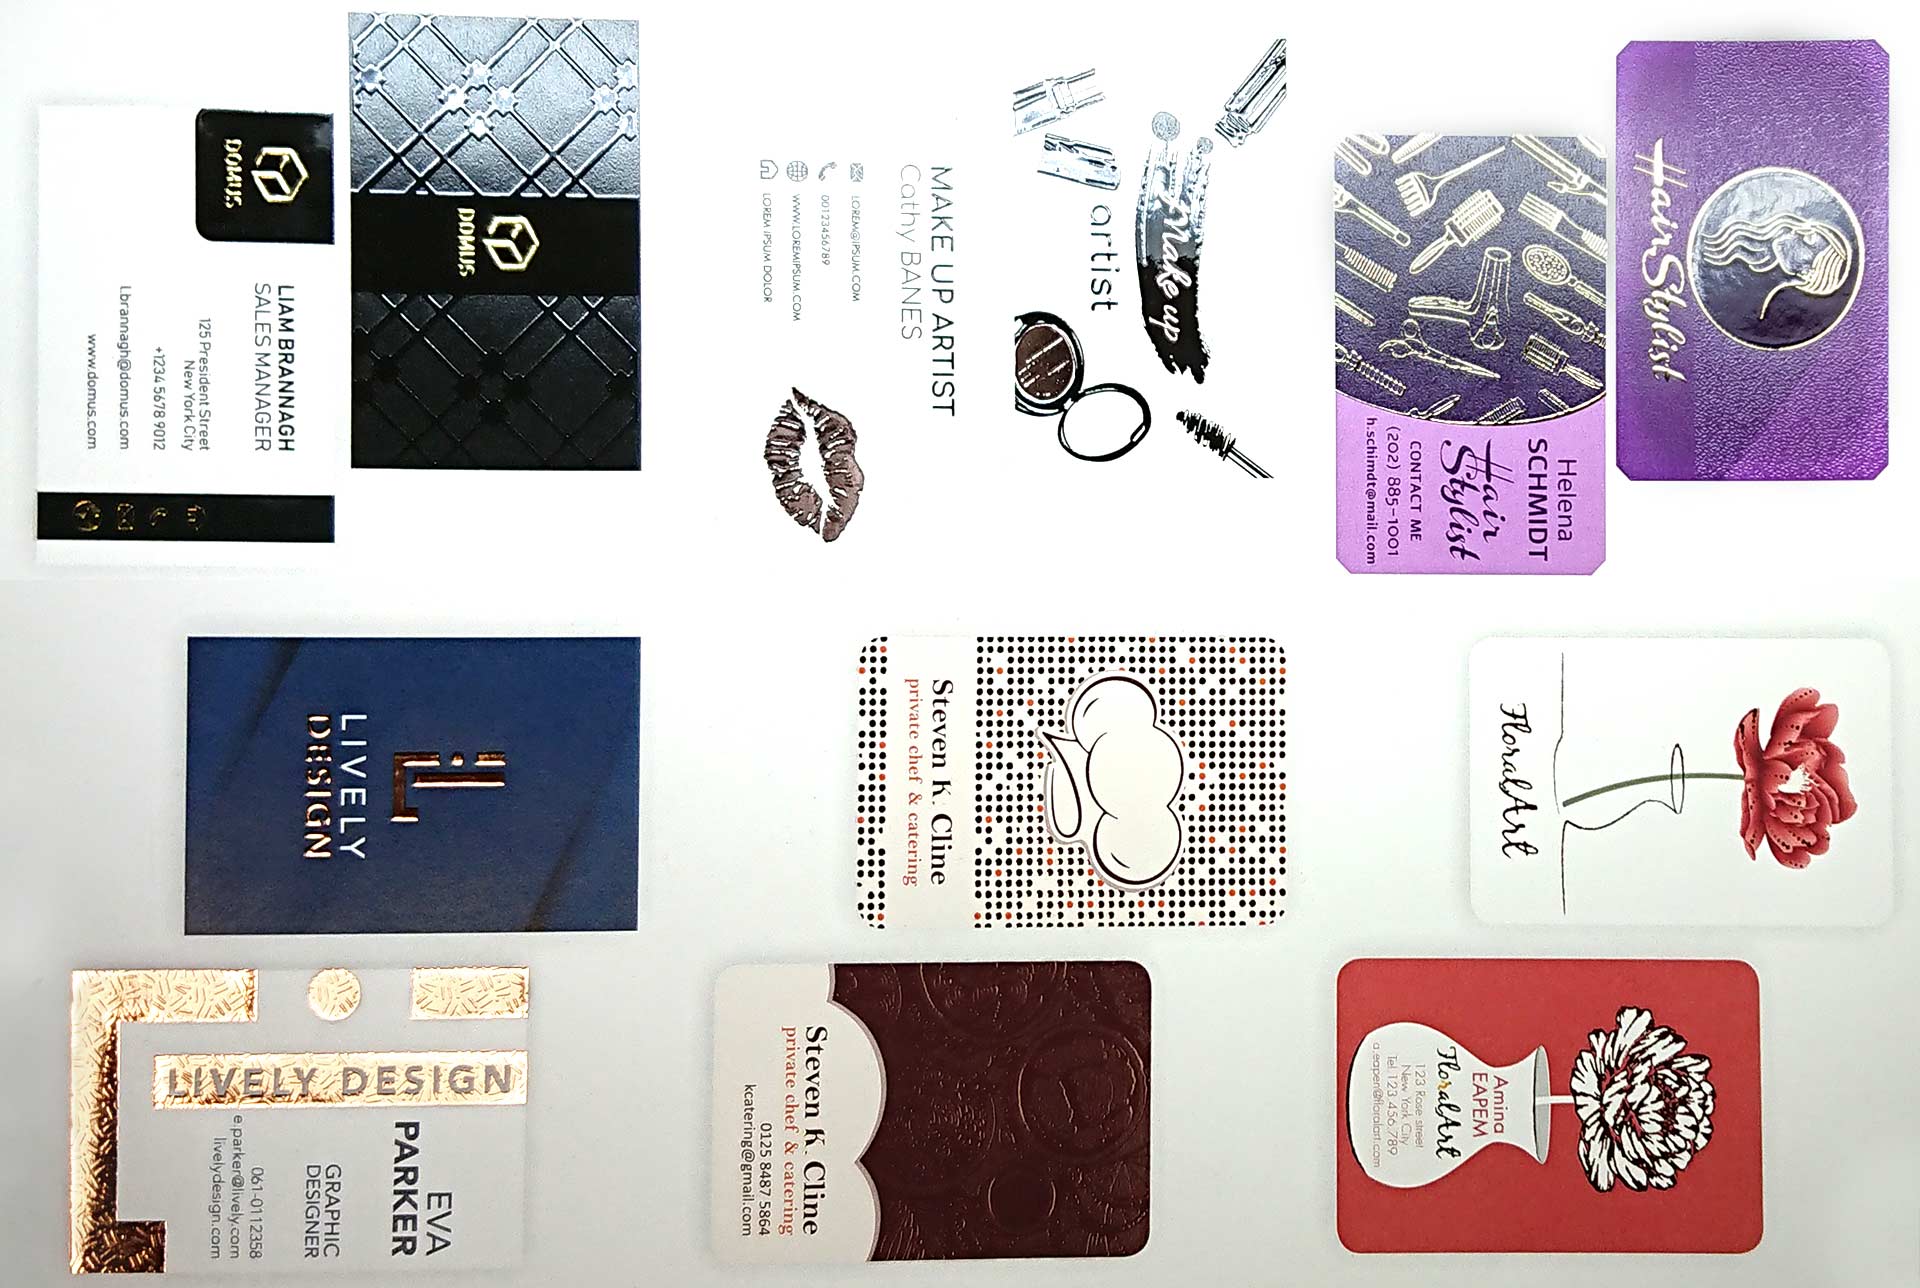 photo of embellished business cards on an MGI Digital Technology press